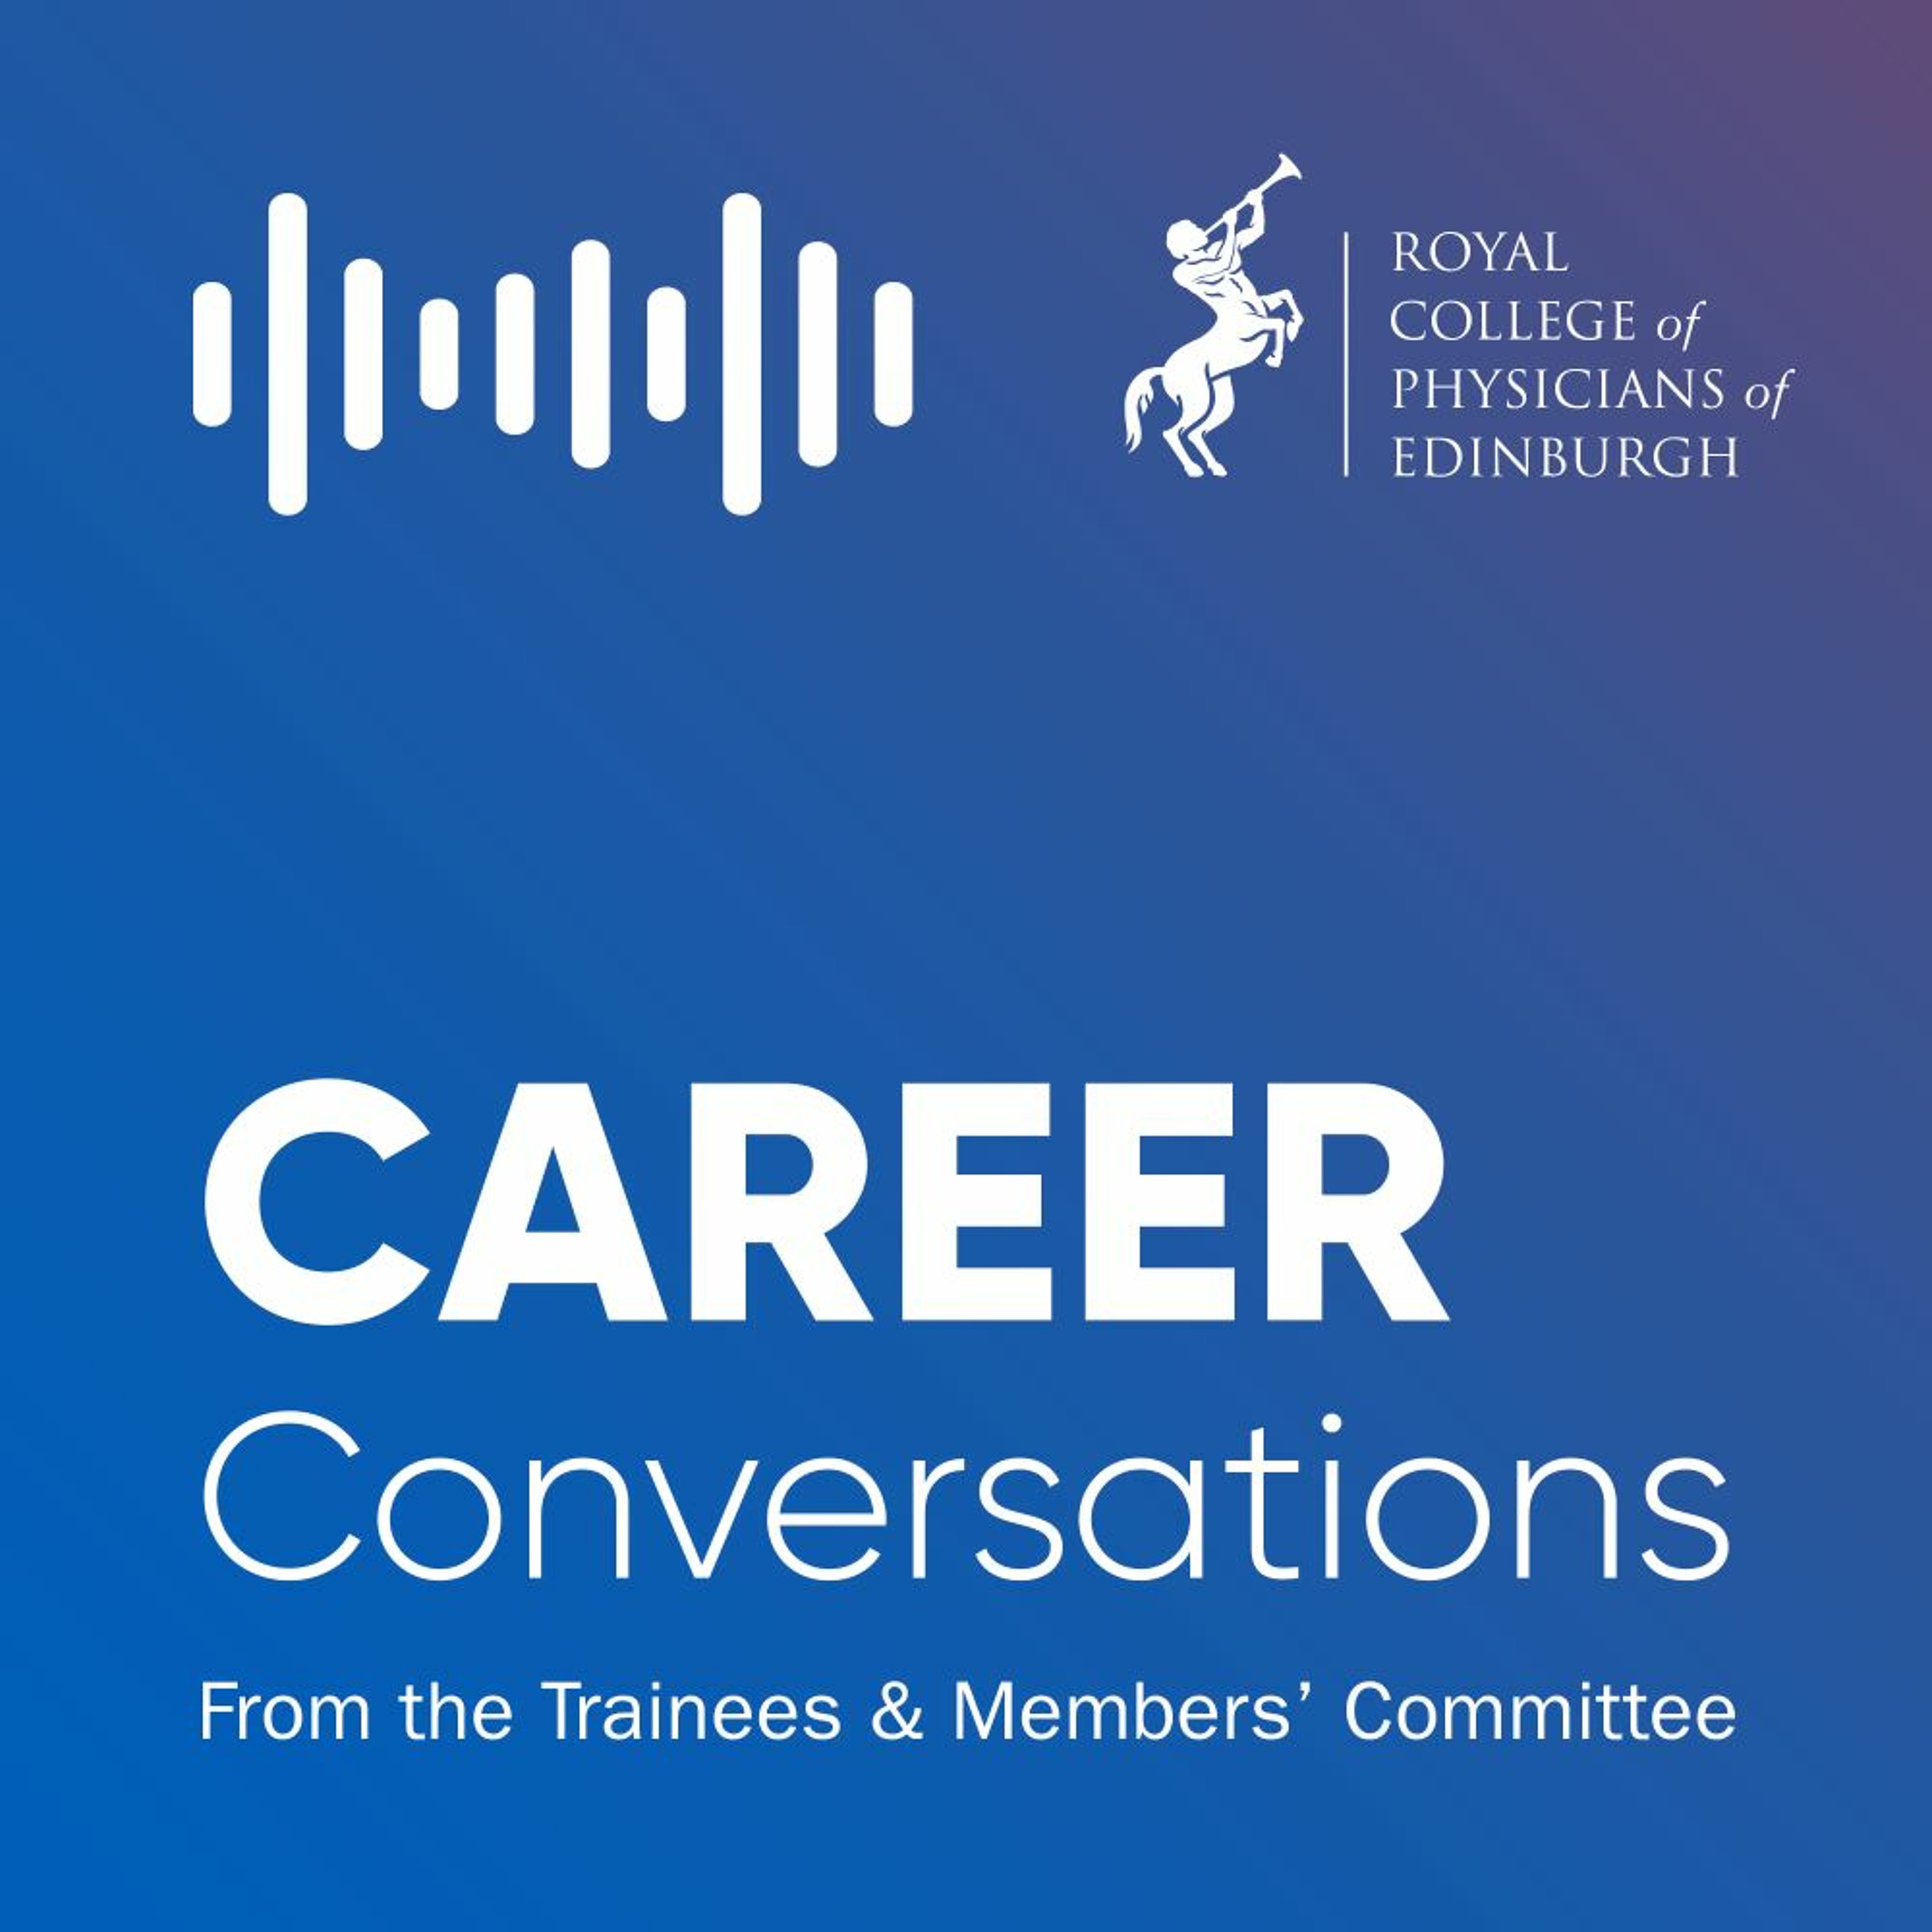 Interview themes and top tips for HST (18 Jan 2023)